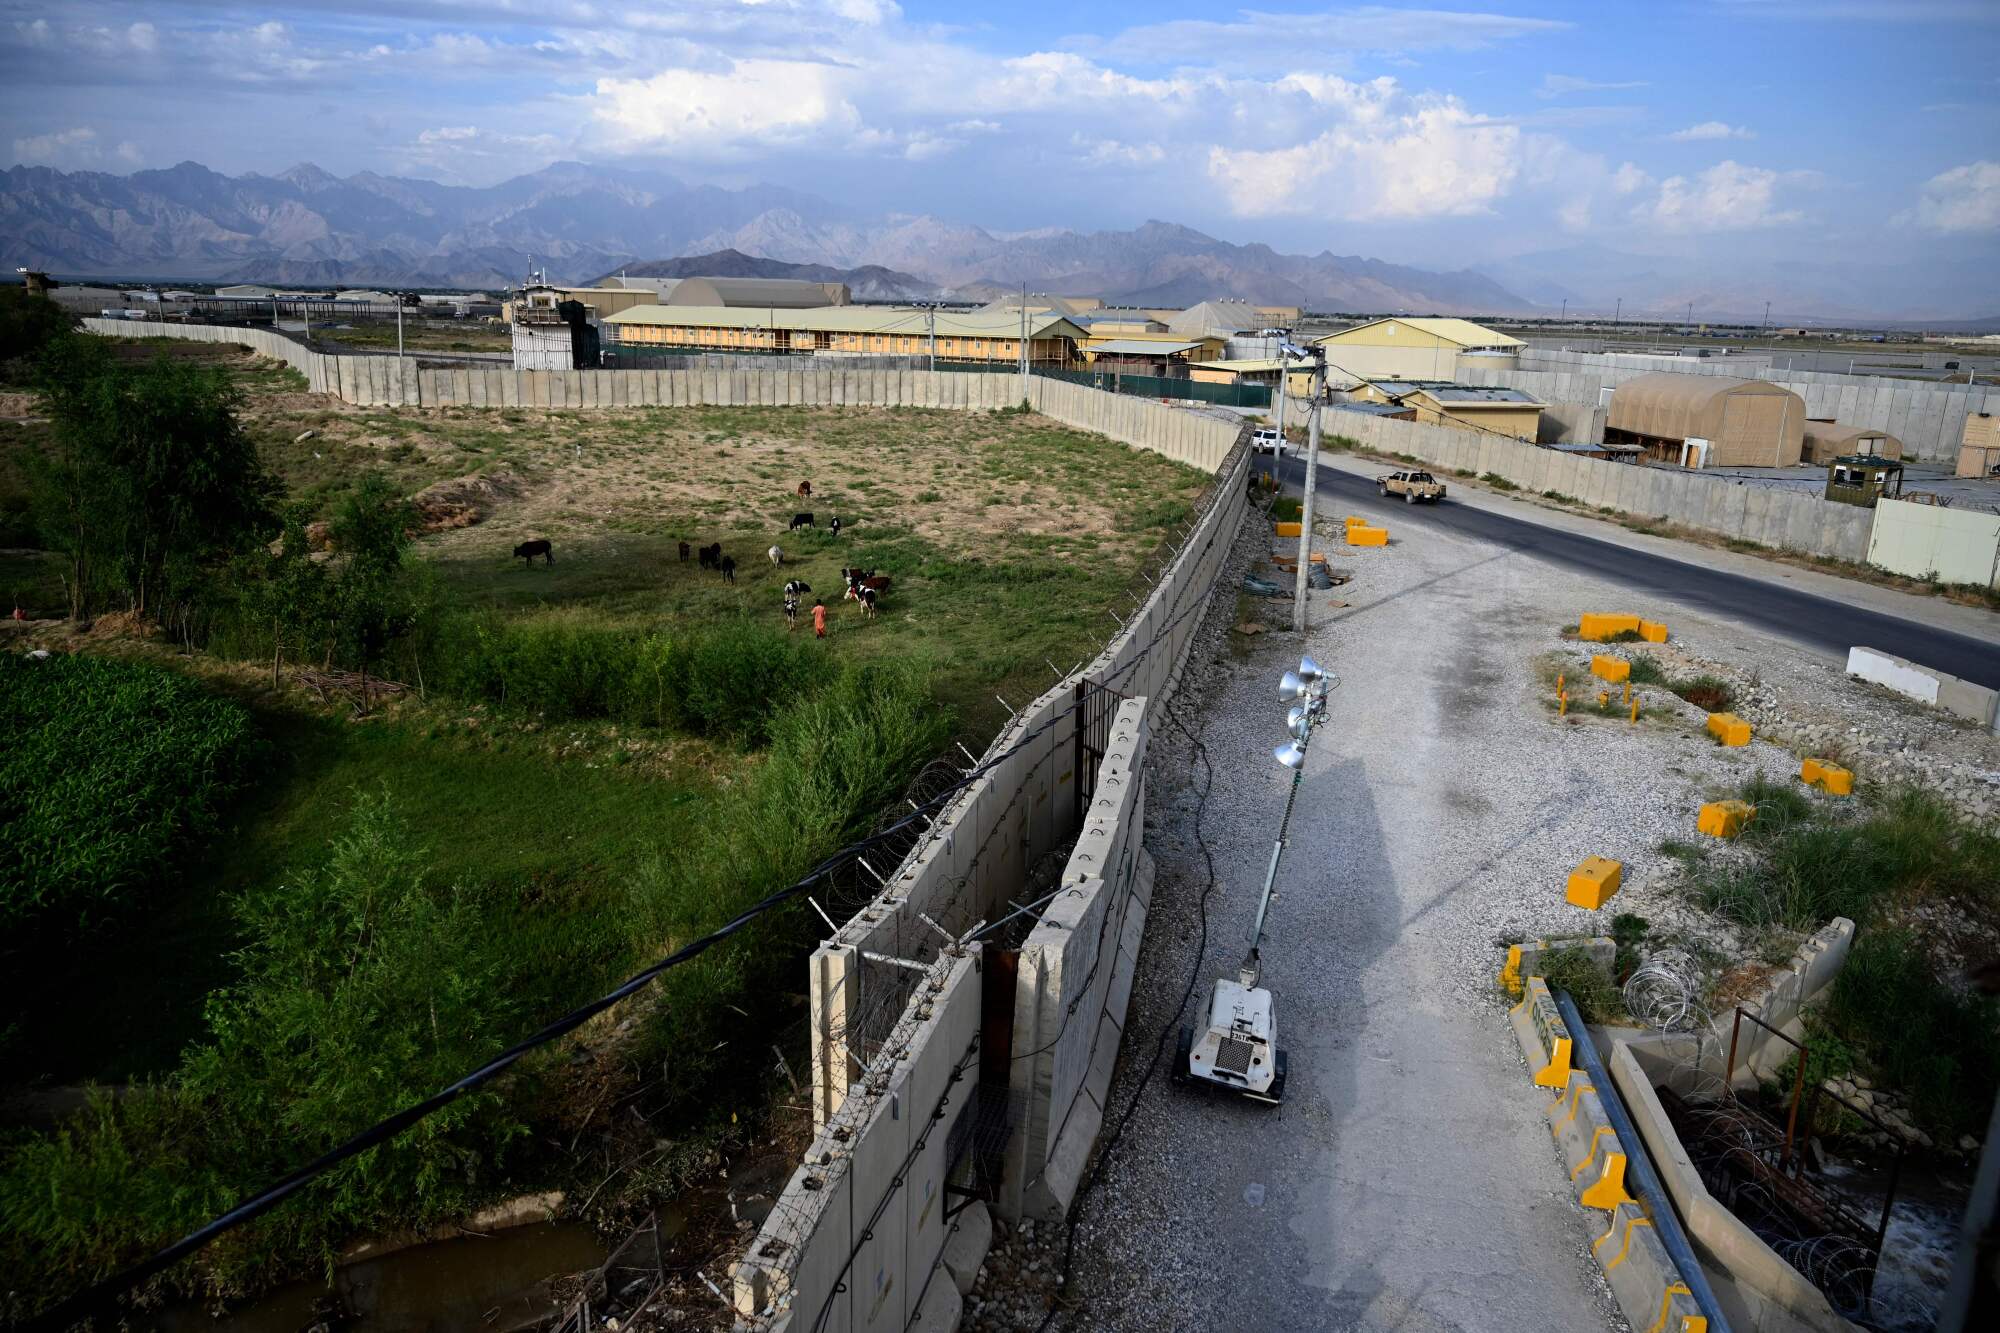 Overview of the Bagram air base with walls and structures  